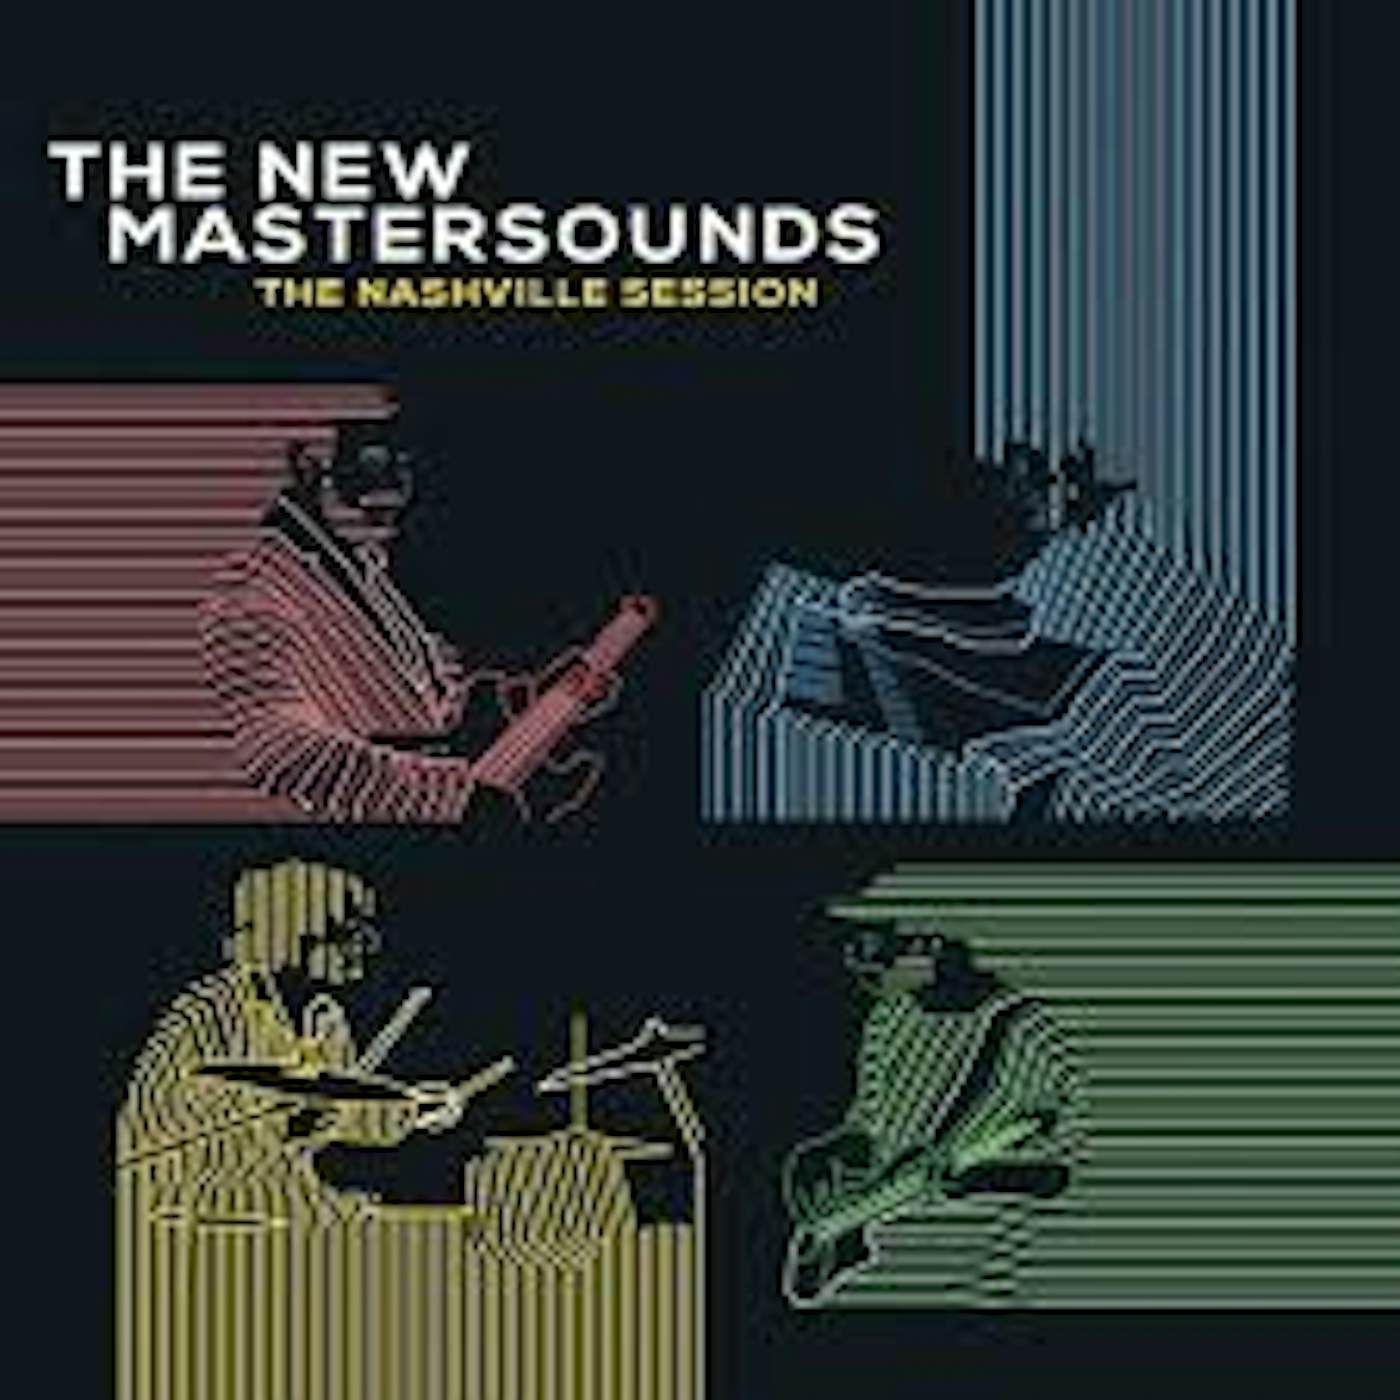 The New Mastersounds NASHVILLE SESSION Vinyl Record